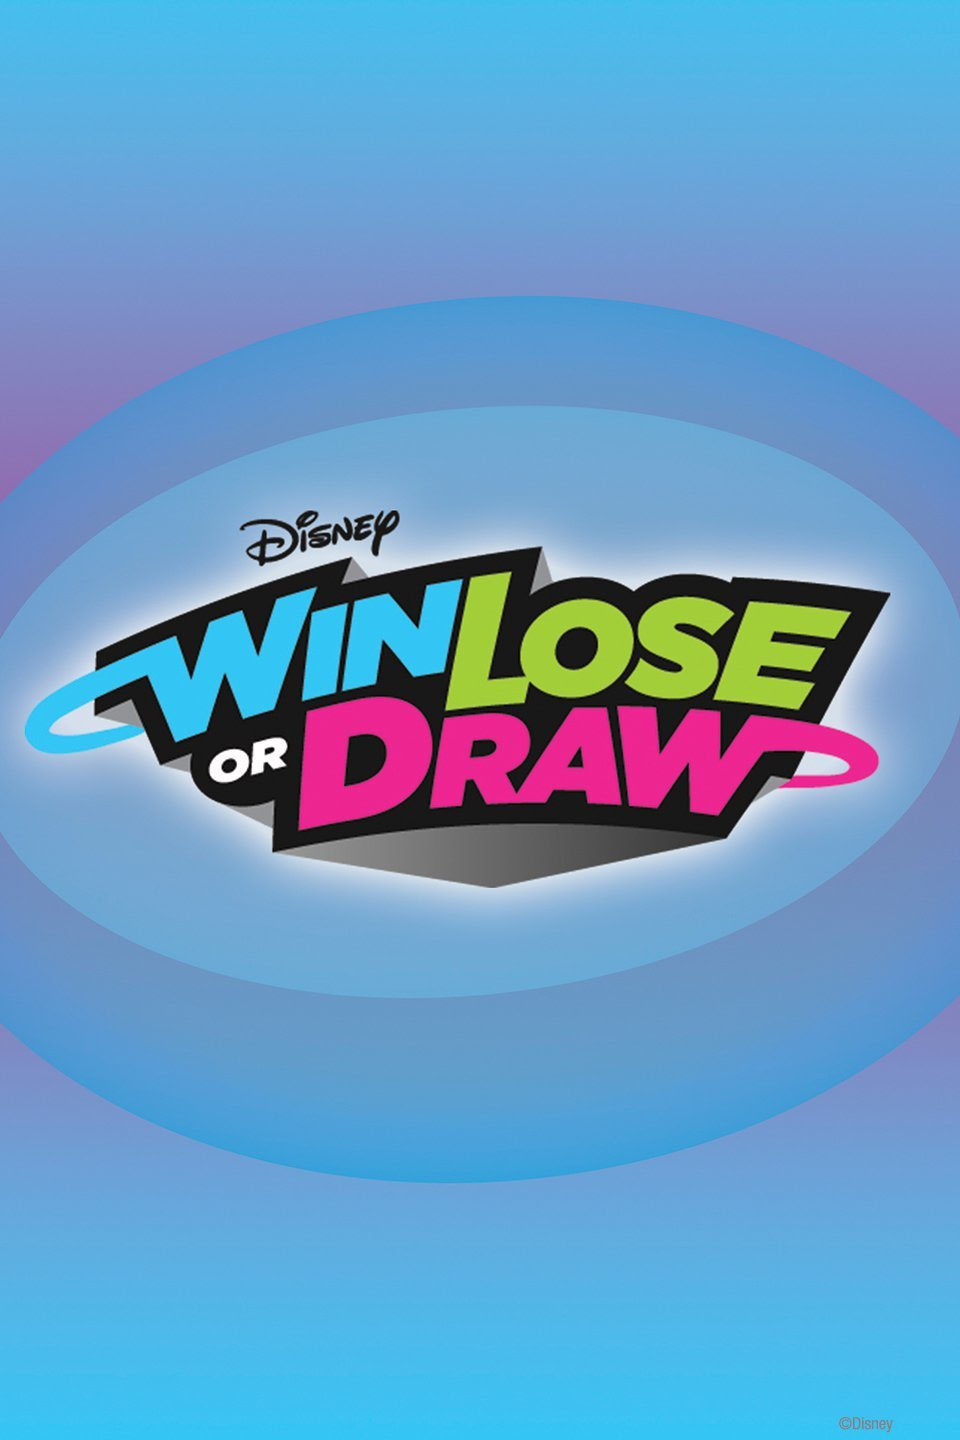 Third Win Lose or Draw Episode - Win, Lose, Or Draw (partially lost Disney revival game show; 2014)